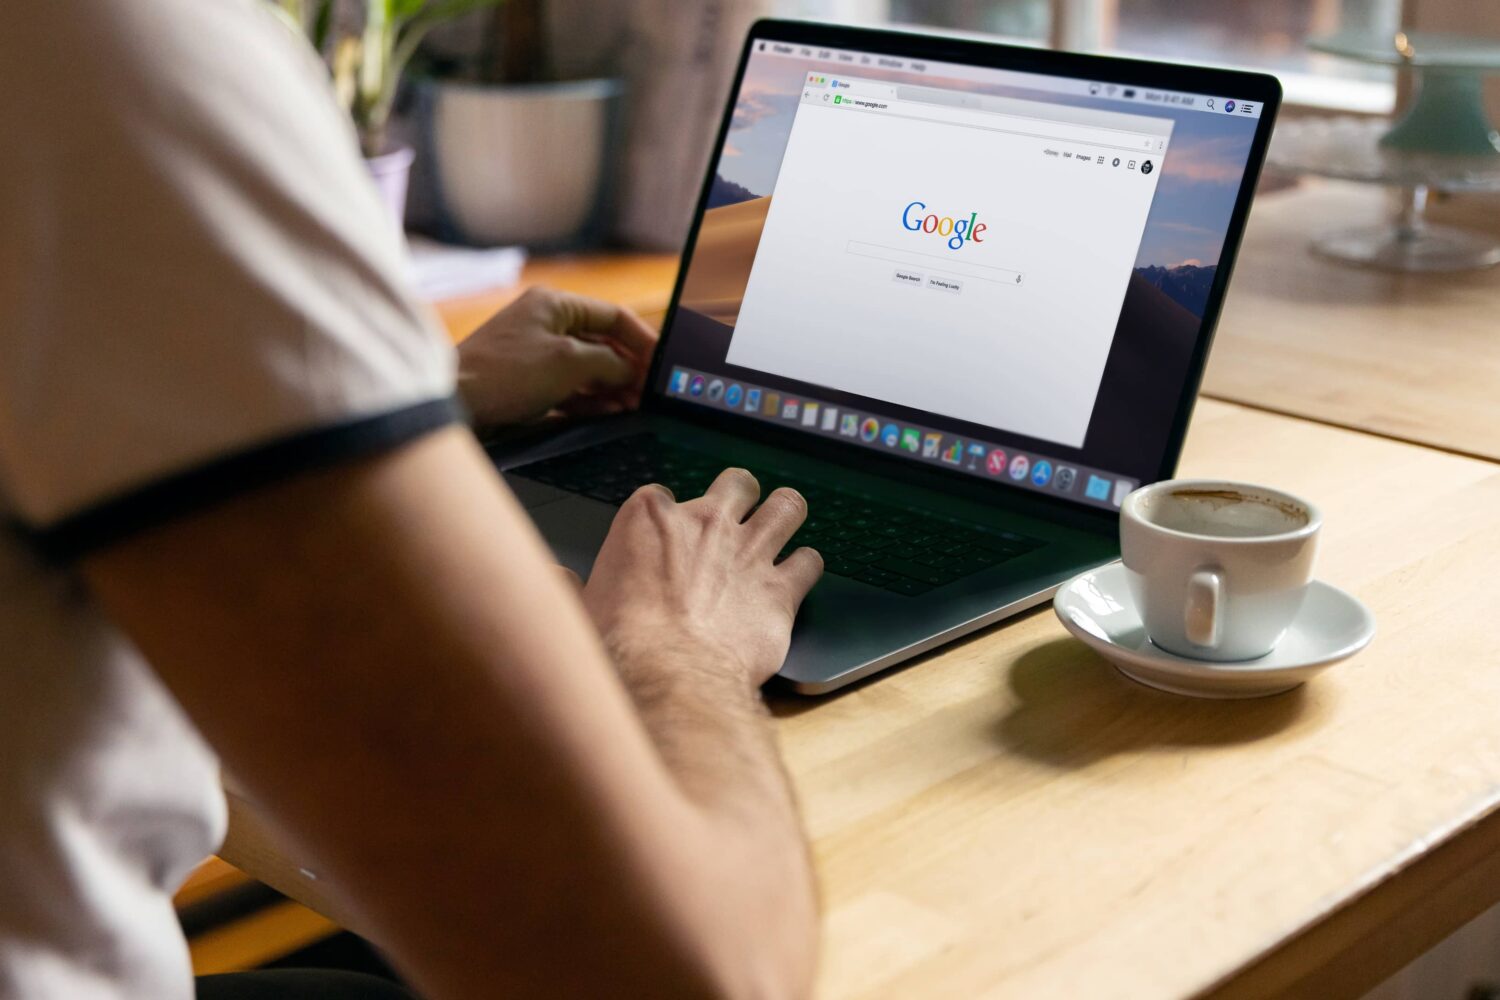 A lifestyle photograph showing a young male from behind, sitting in front of a MacBook Pro with the Chrome browser running on the Google search page